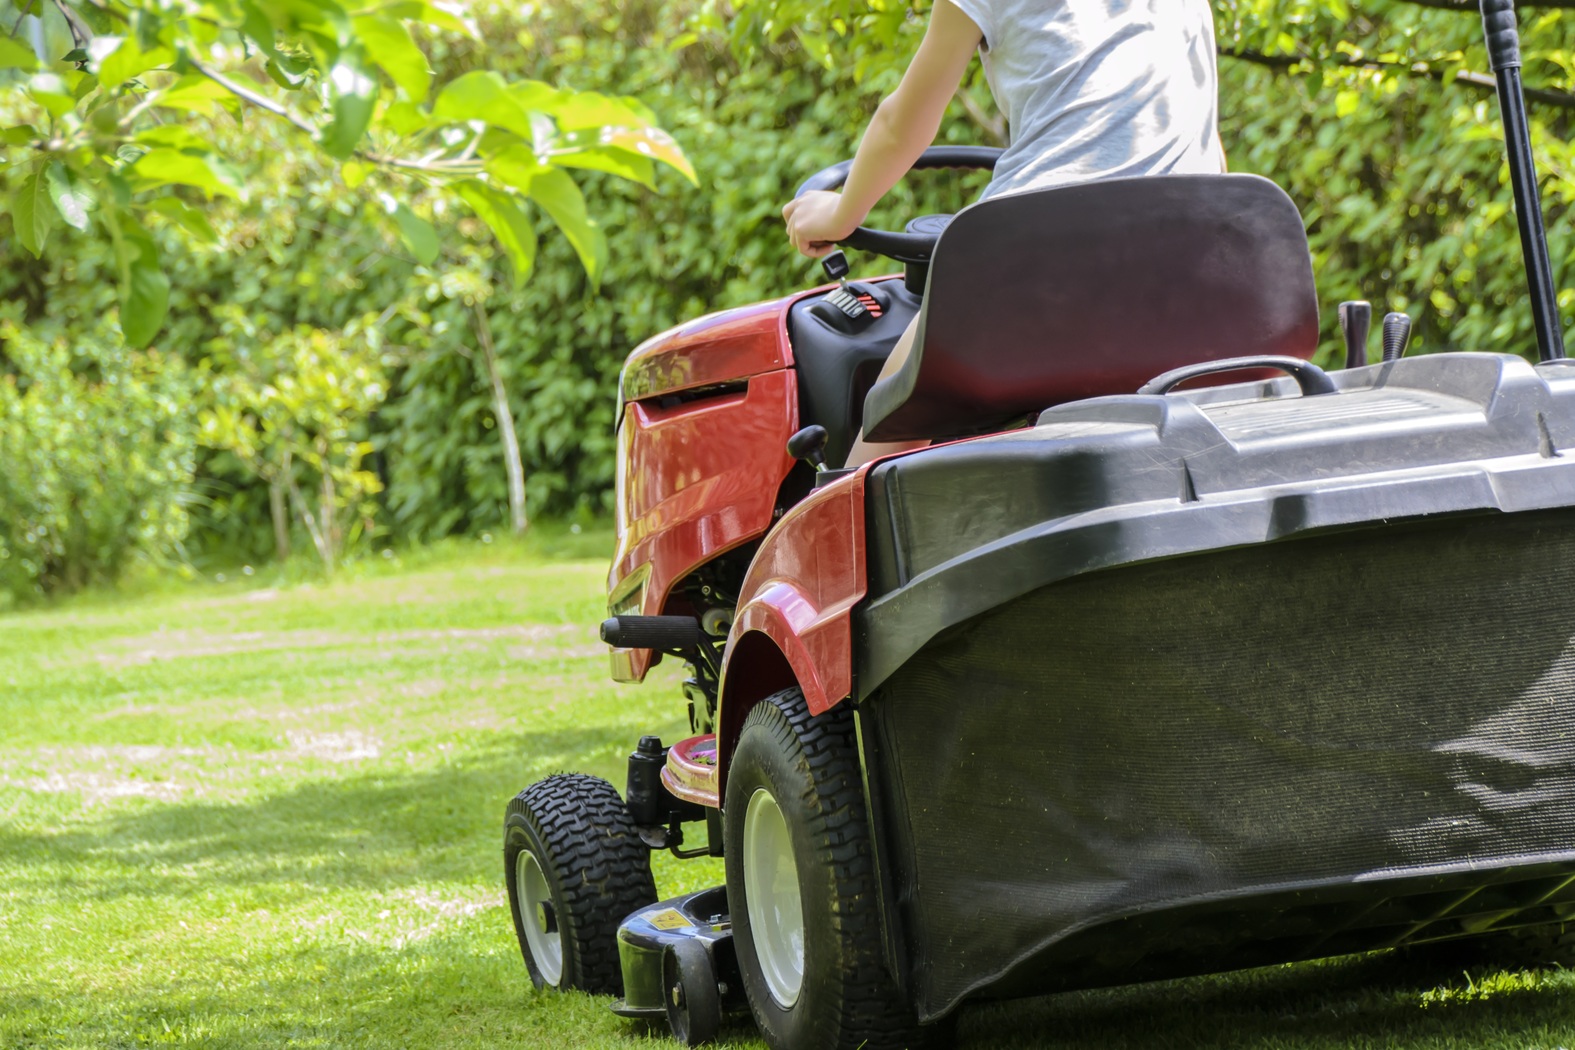 Ranking of the best garden tractors and riders for 2020